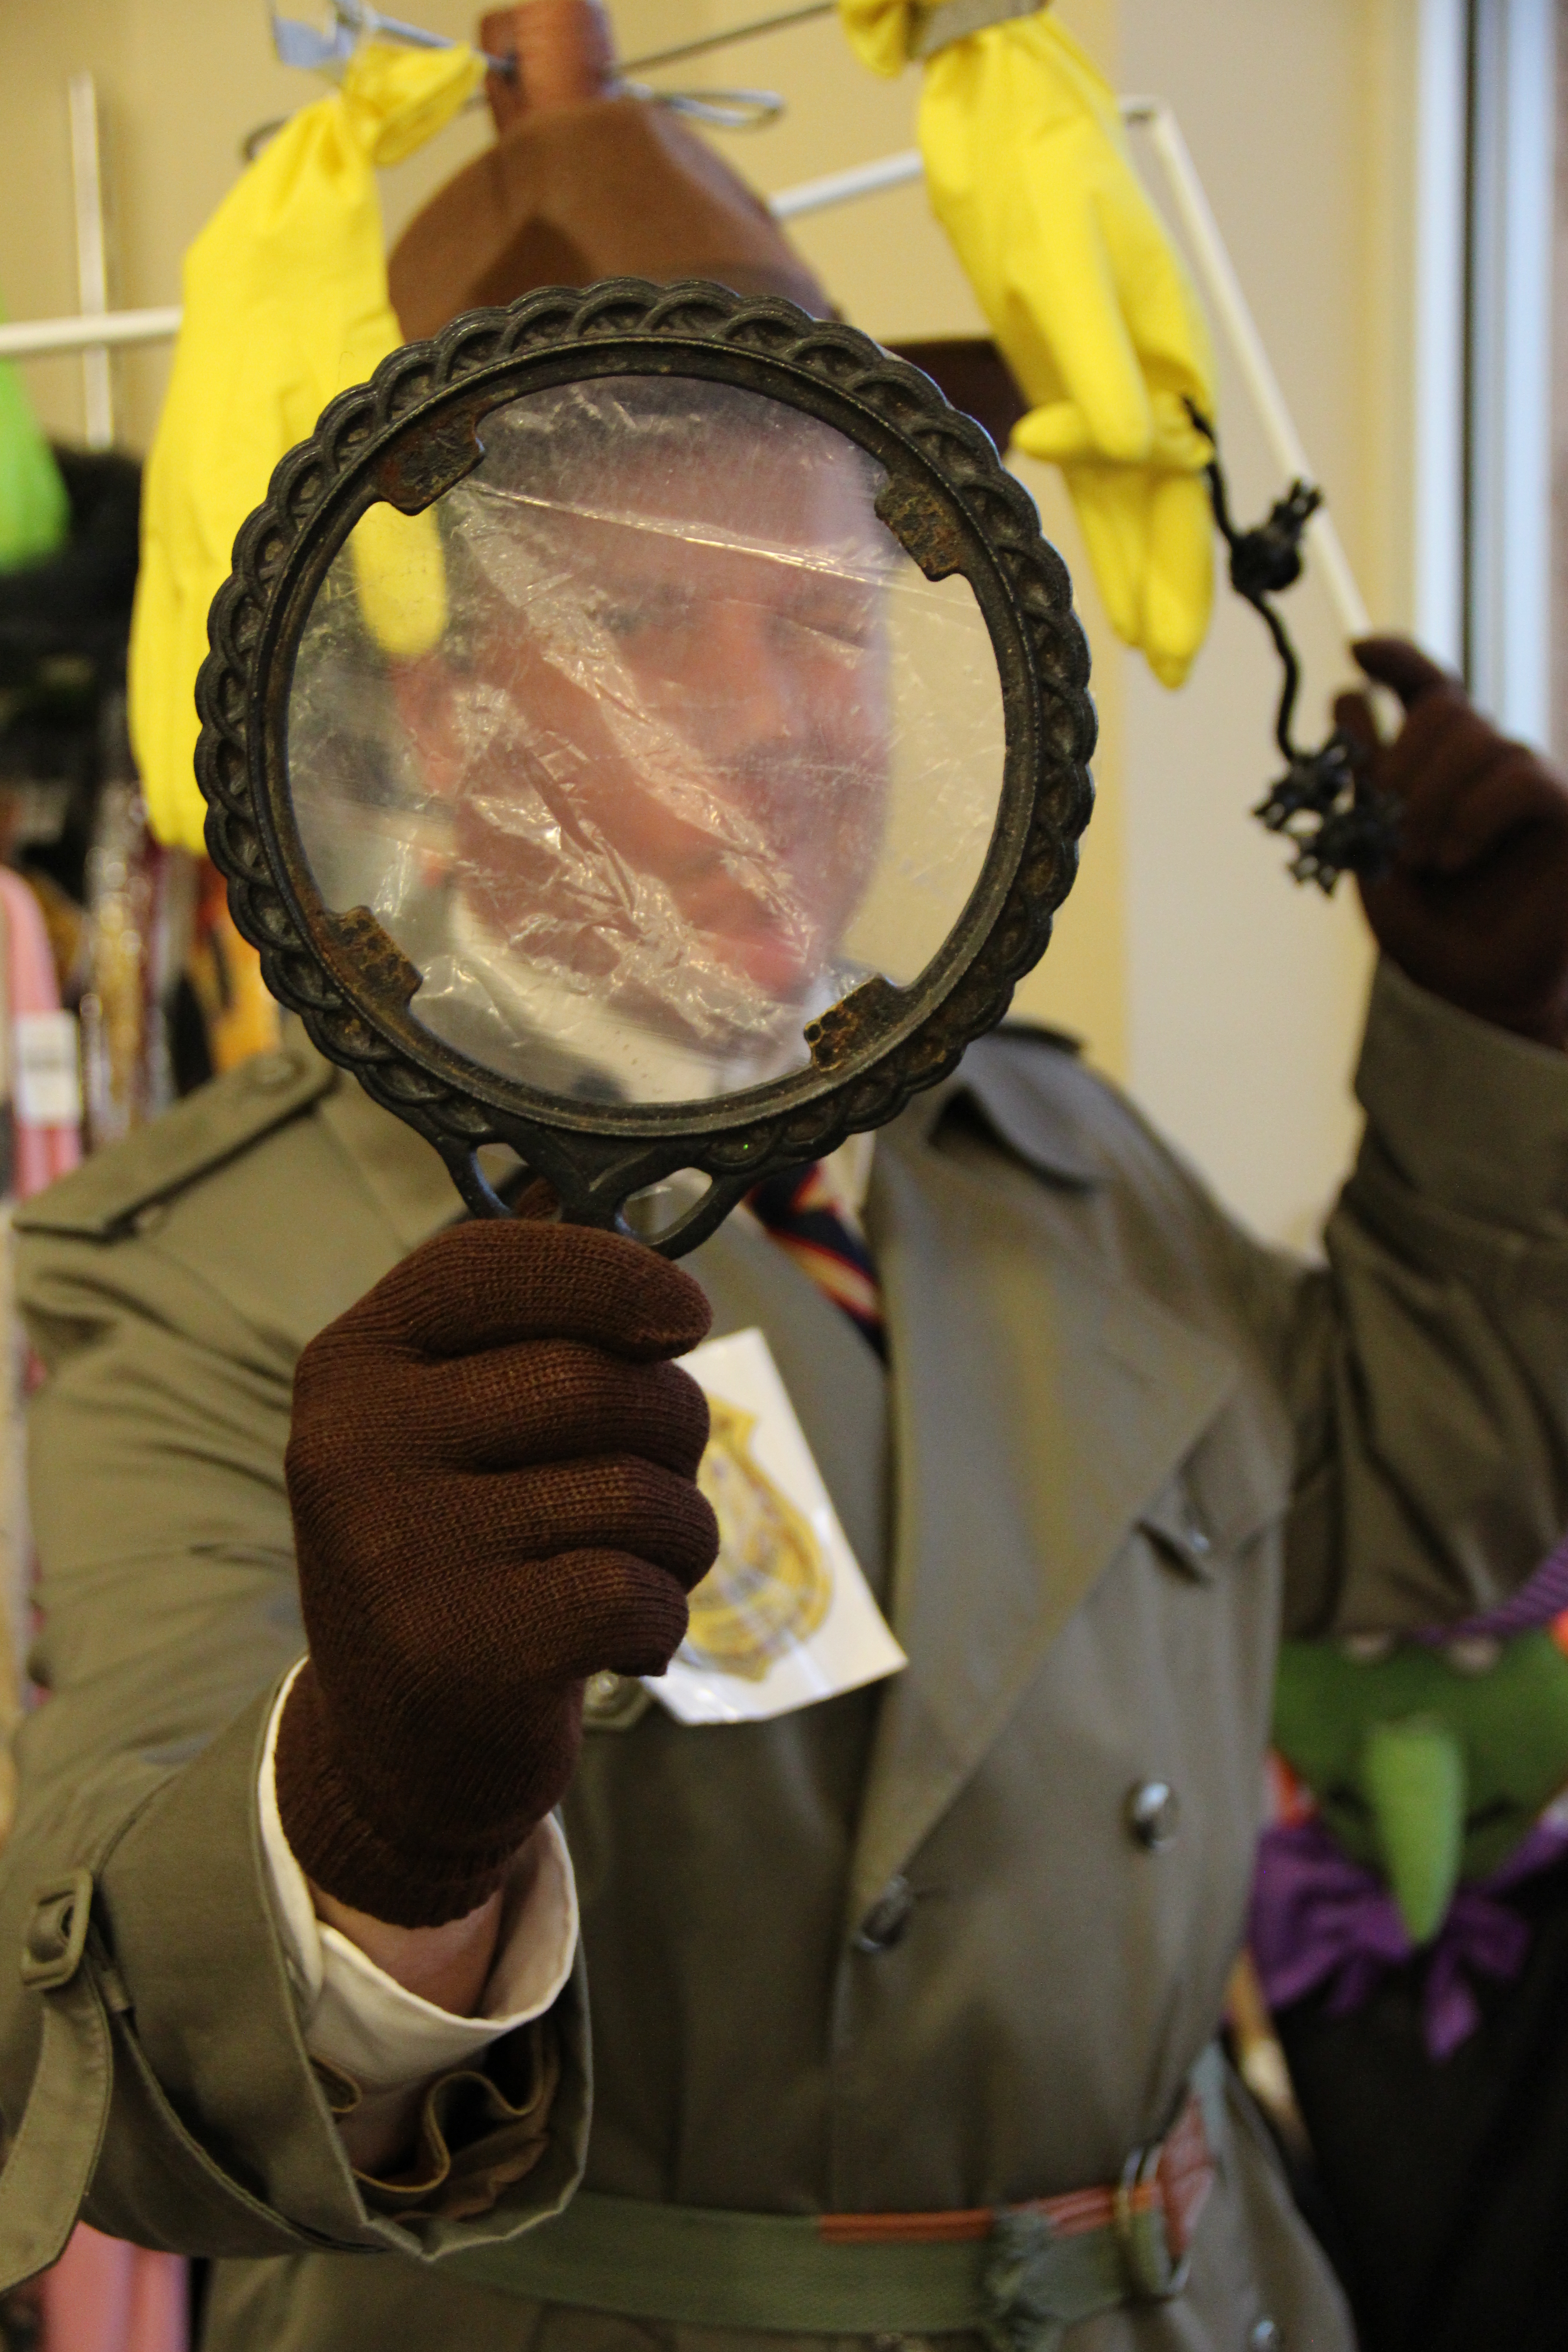 Magnifying glass: Remove the mirror from an hand-held mirror frame. Glue a plastic bag to the back of the mirror; when dry, cut off excess.